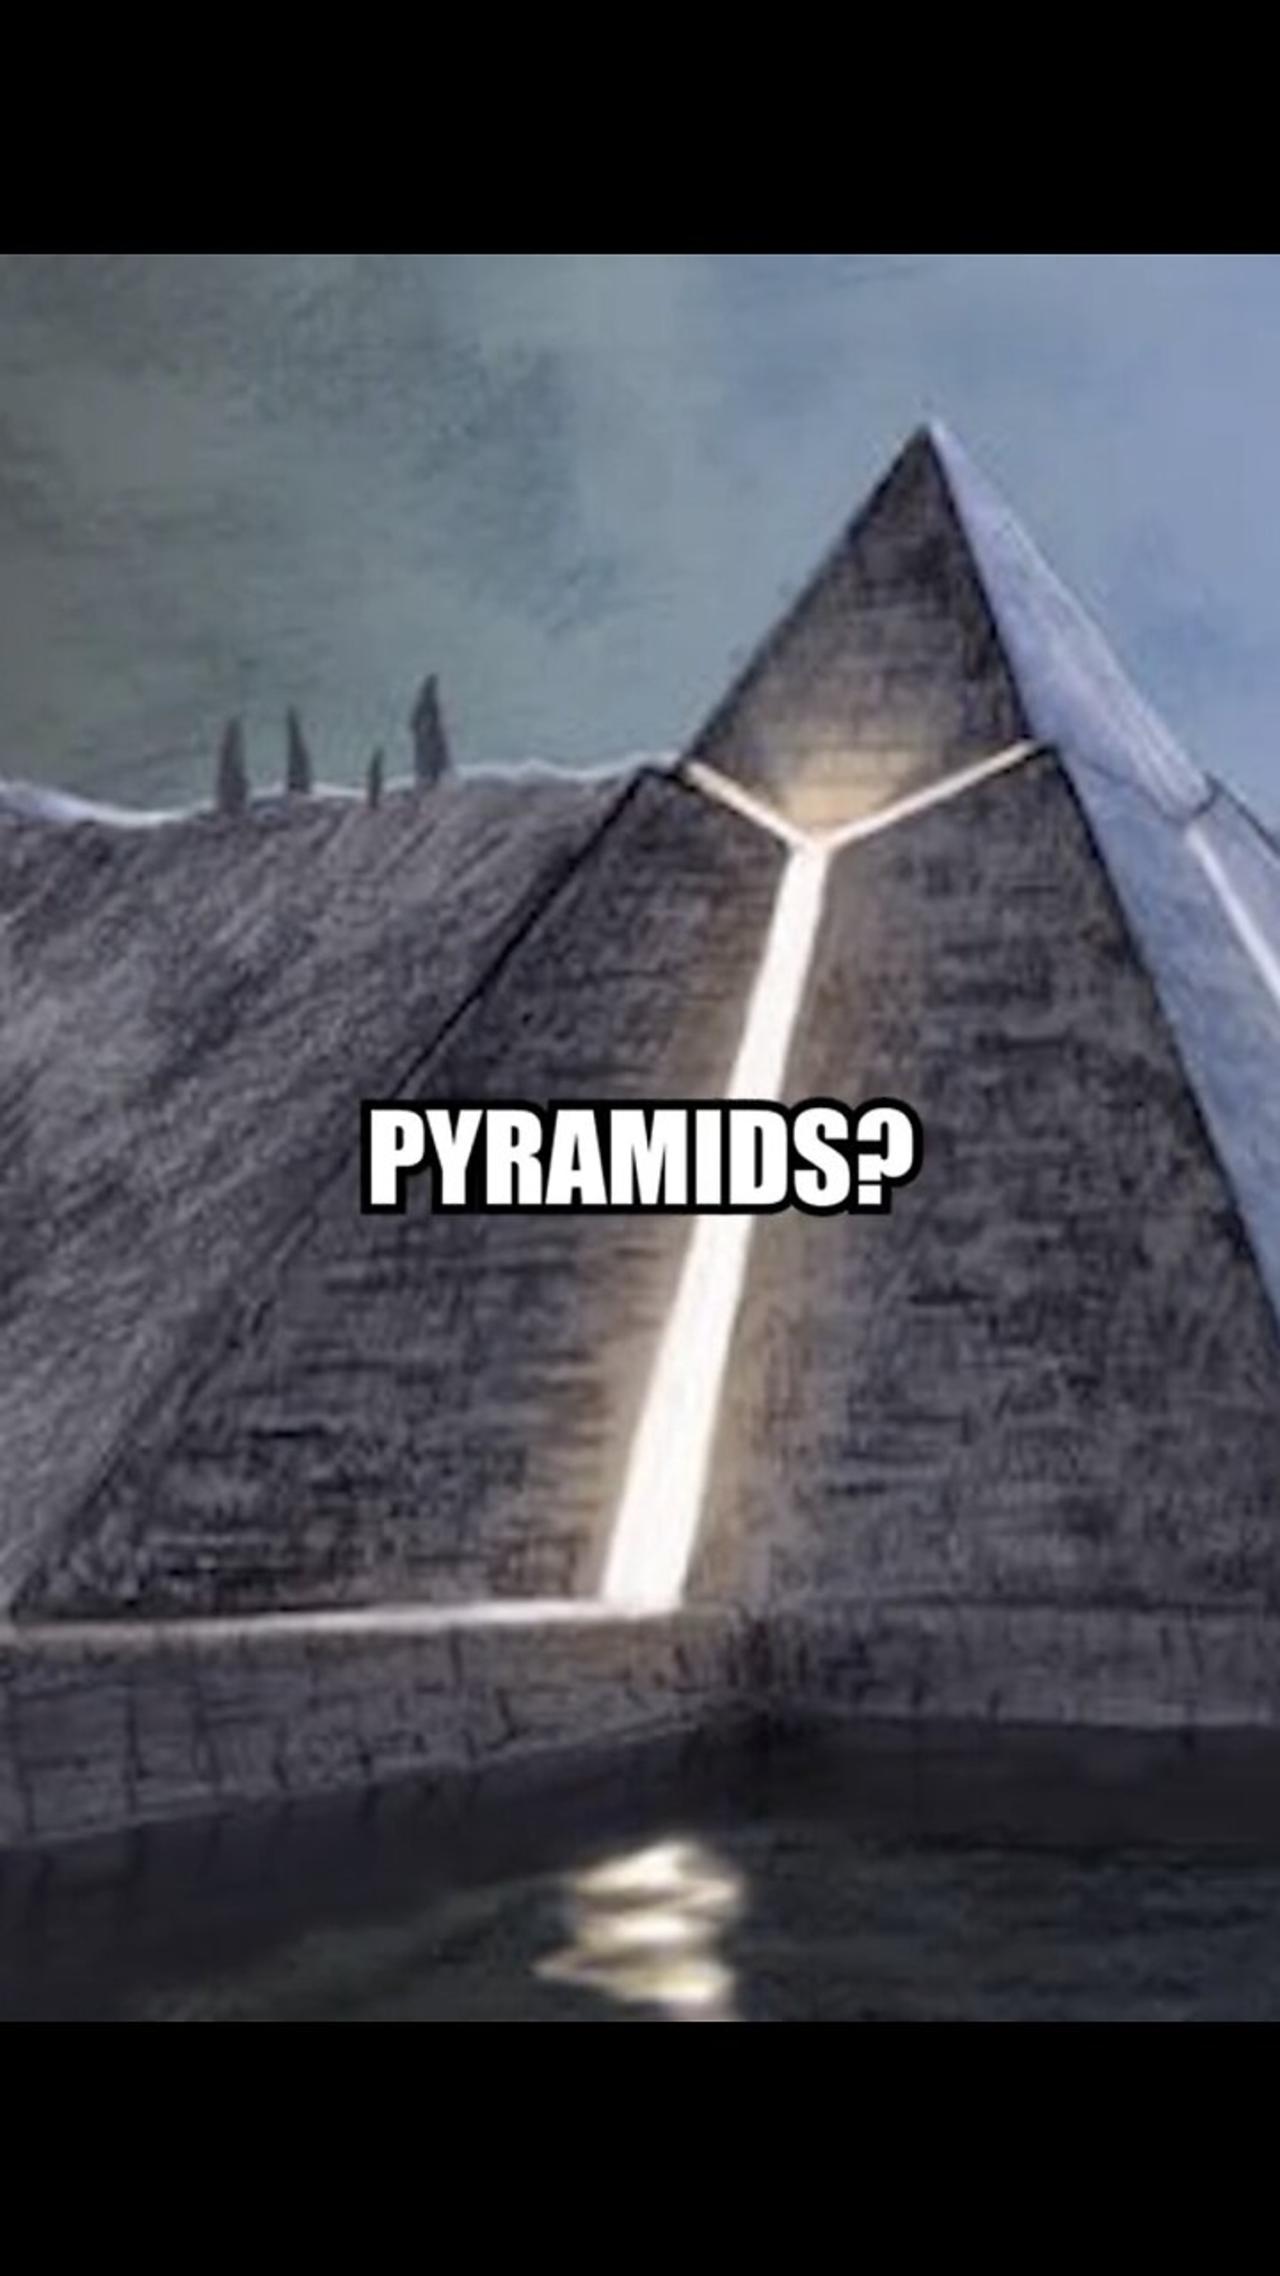 The true purpose of the pyramids… PYRAMIDS ARE POWER PLANTS and FREQUENCIES TRANSMITTERS